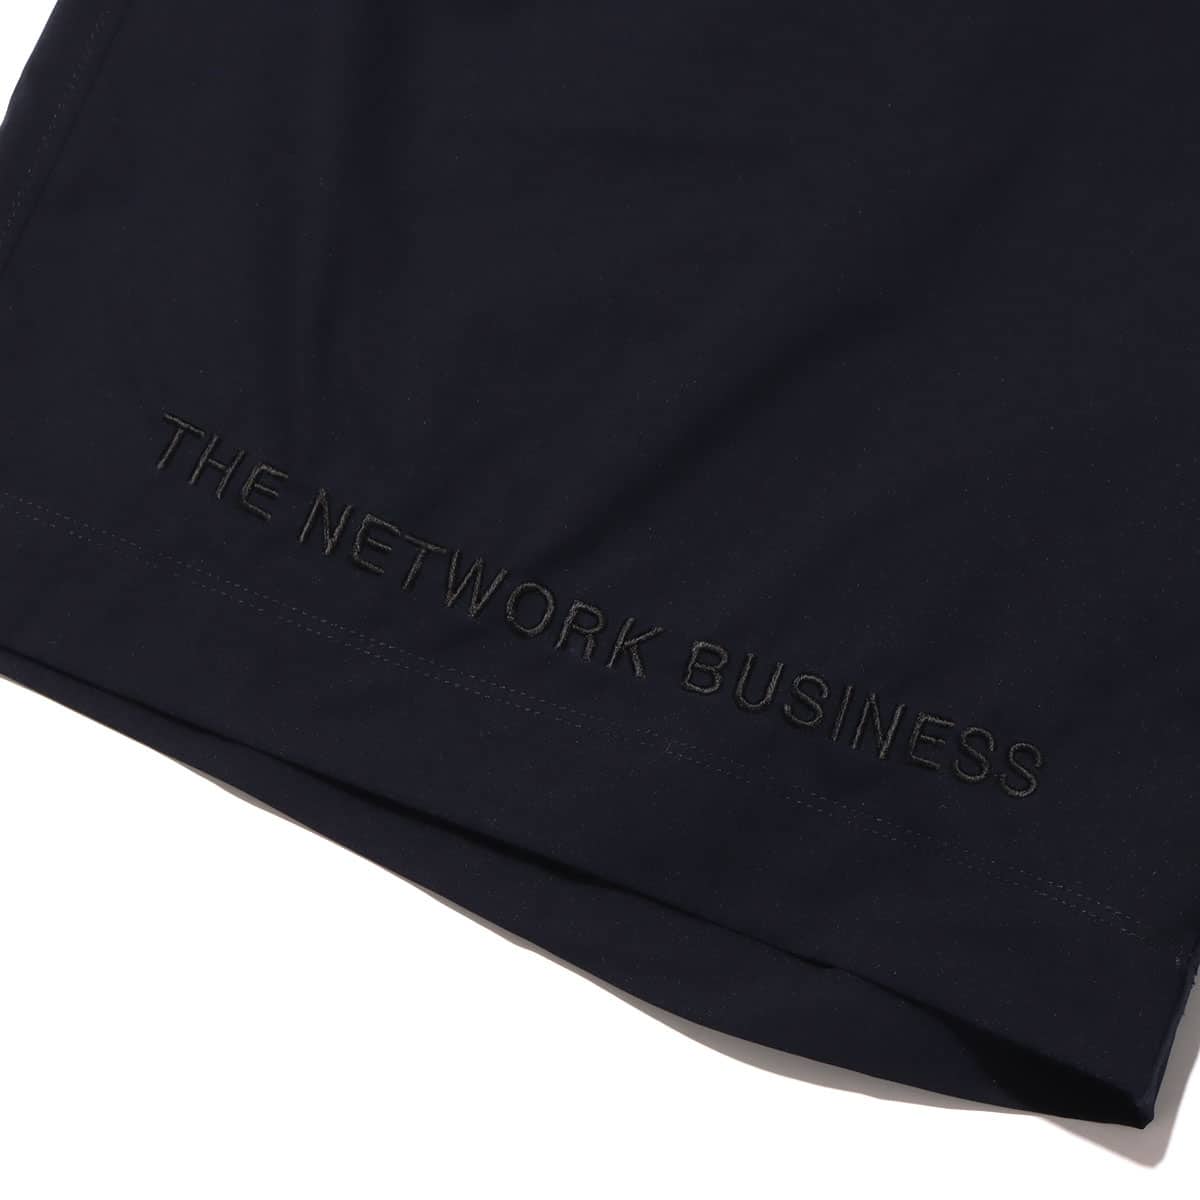 THE NETWORK BUSINESS WING LOGO EMBROIDERY NYLON SHORTS NAVY 22SU-I